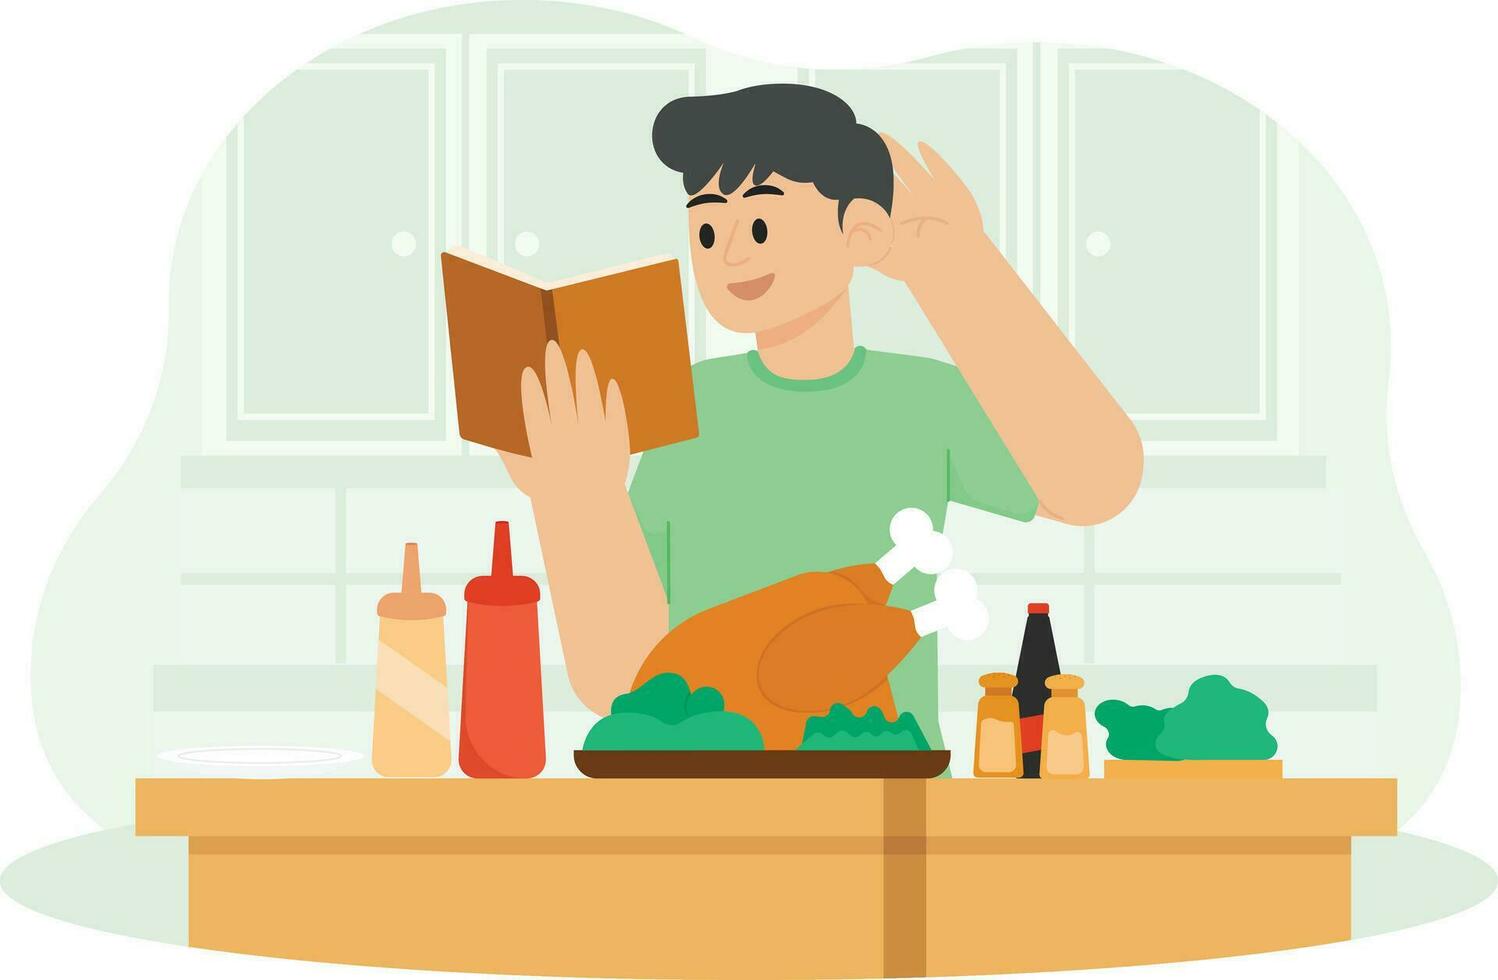 A Man Who Is Cooking Chicken With A Recipe Book Guide Illustration vector